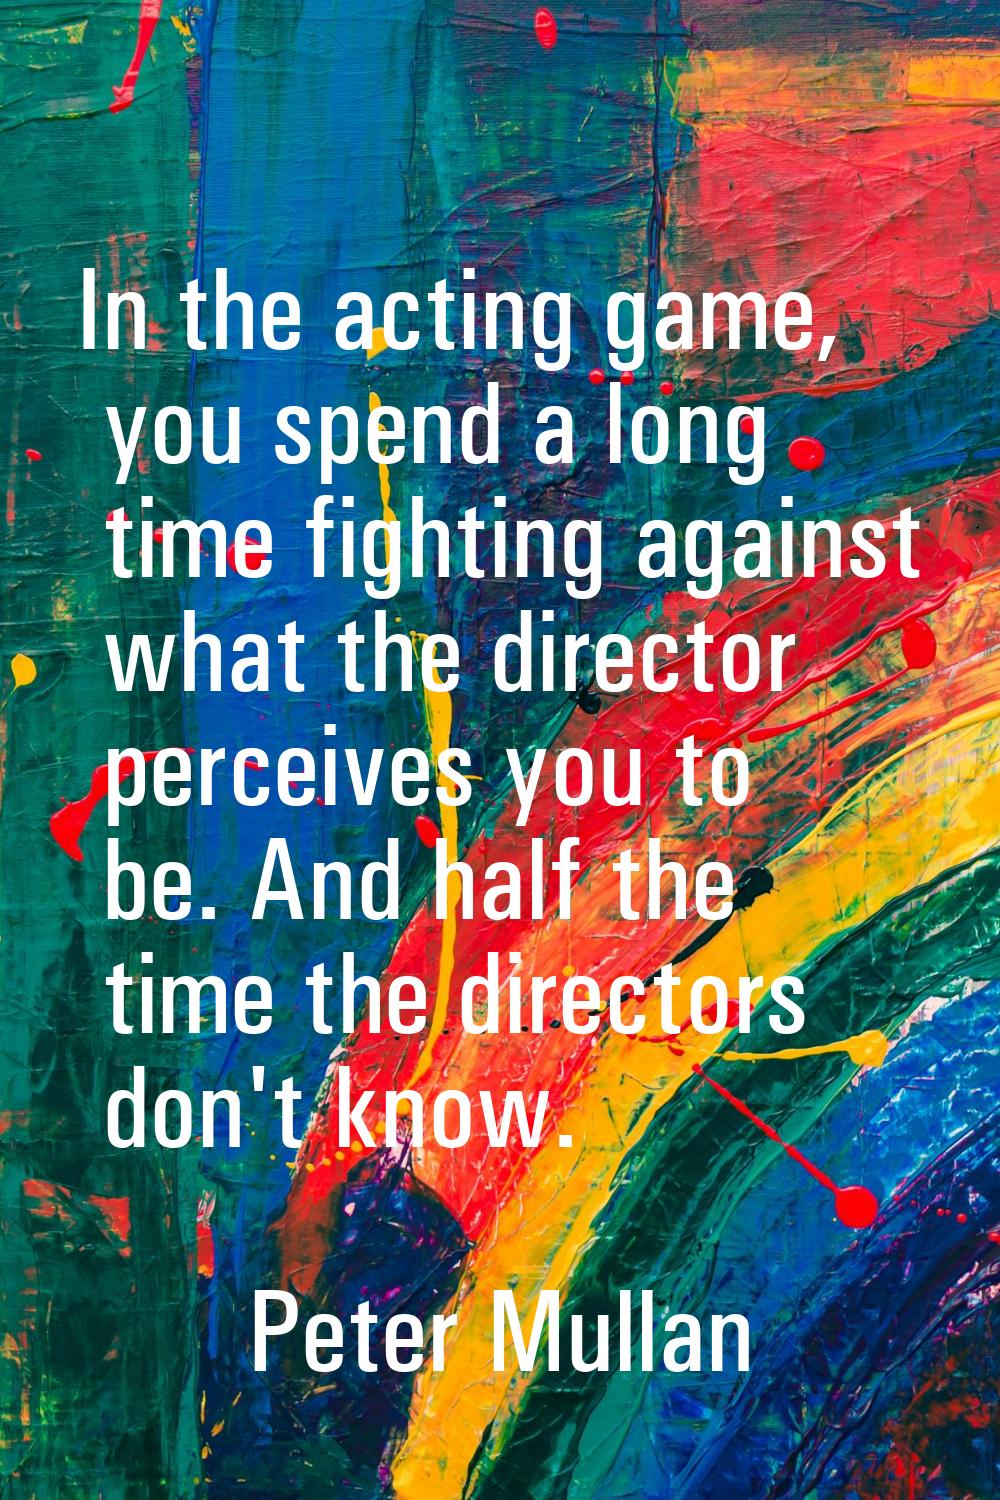 In the acting game, you spend a long time fighting against what the director perceives you to be. A